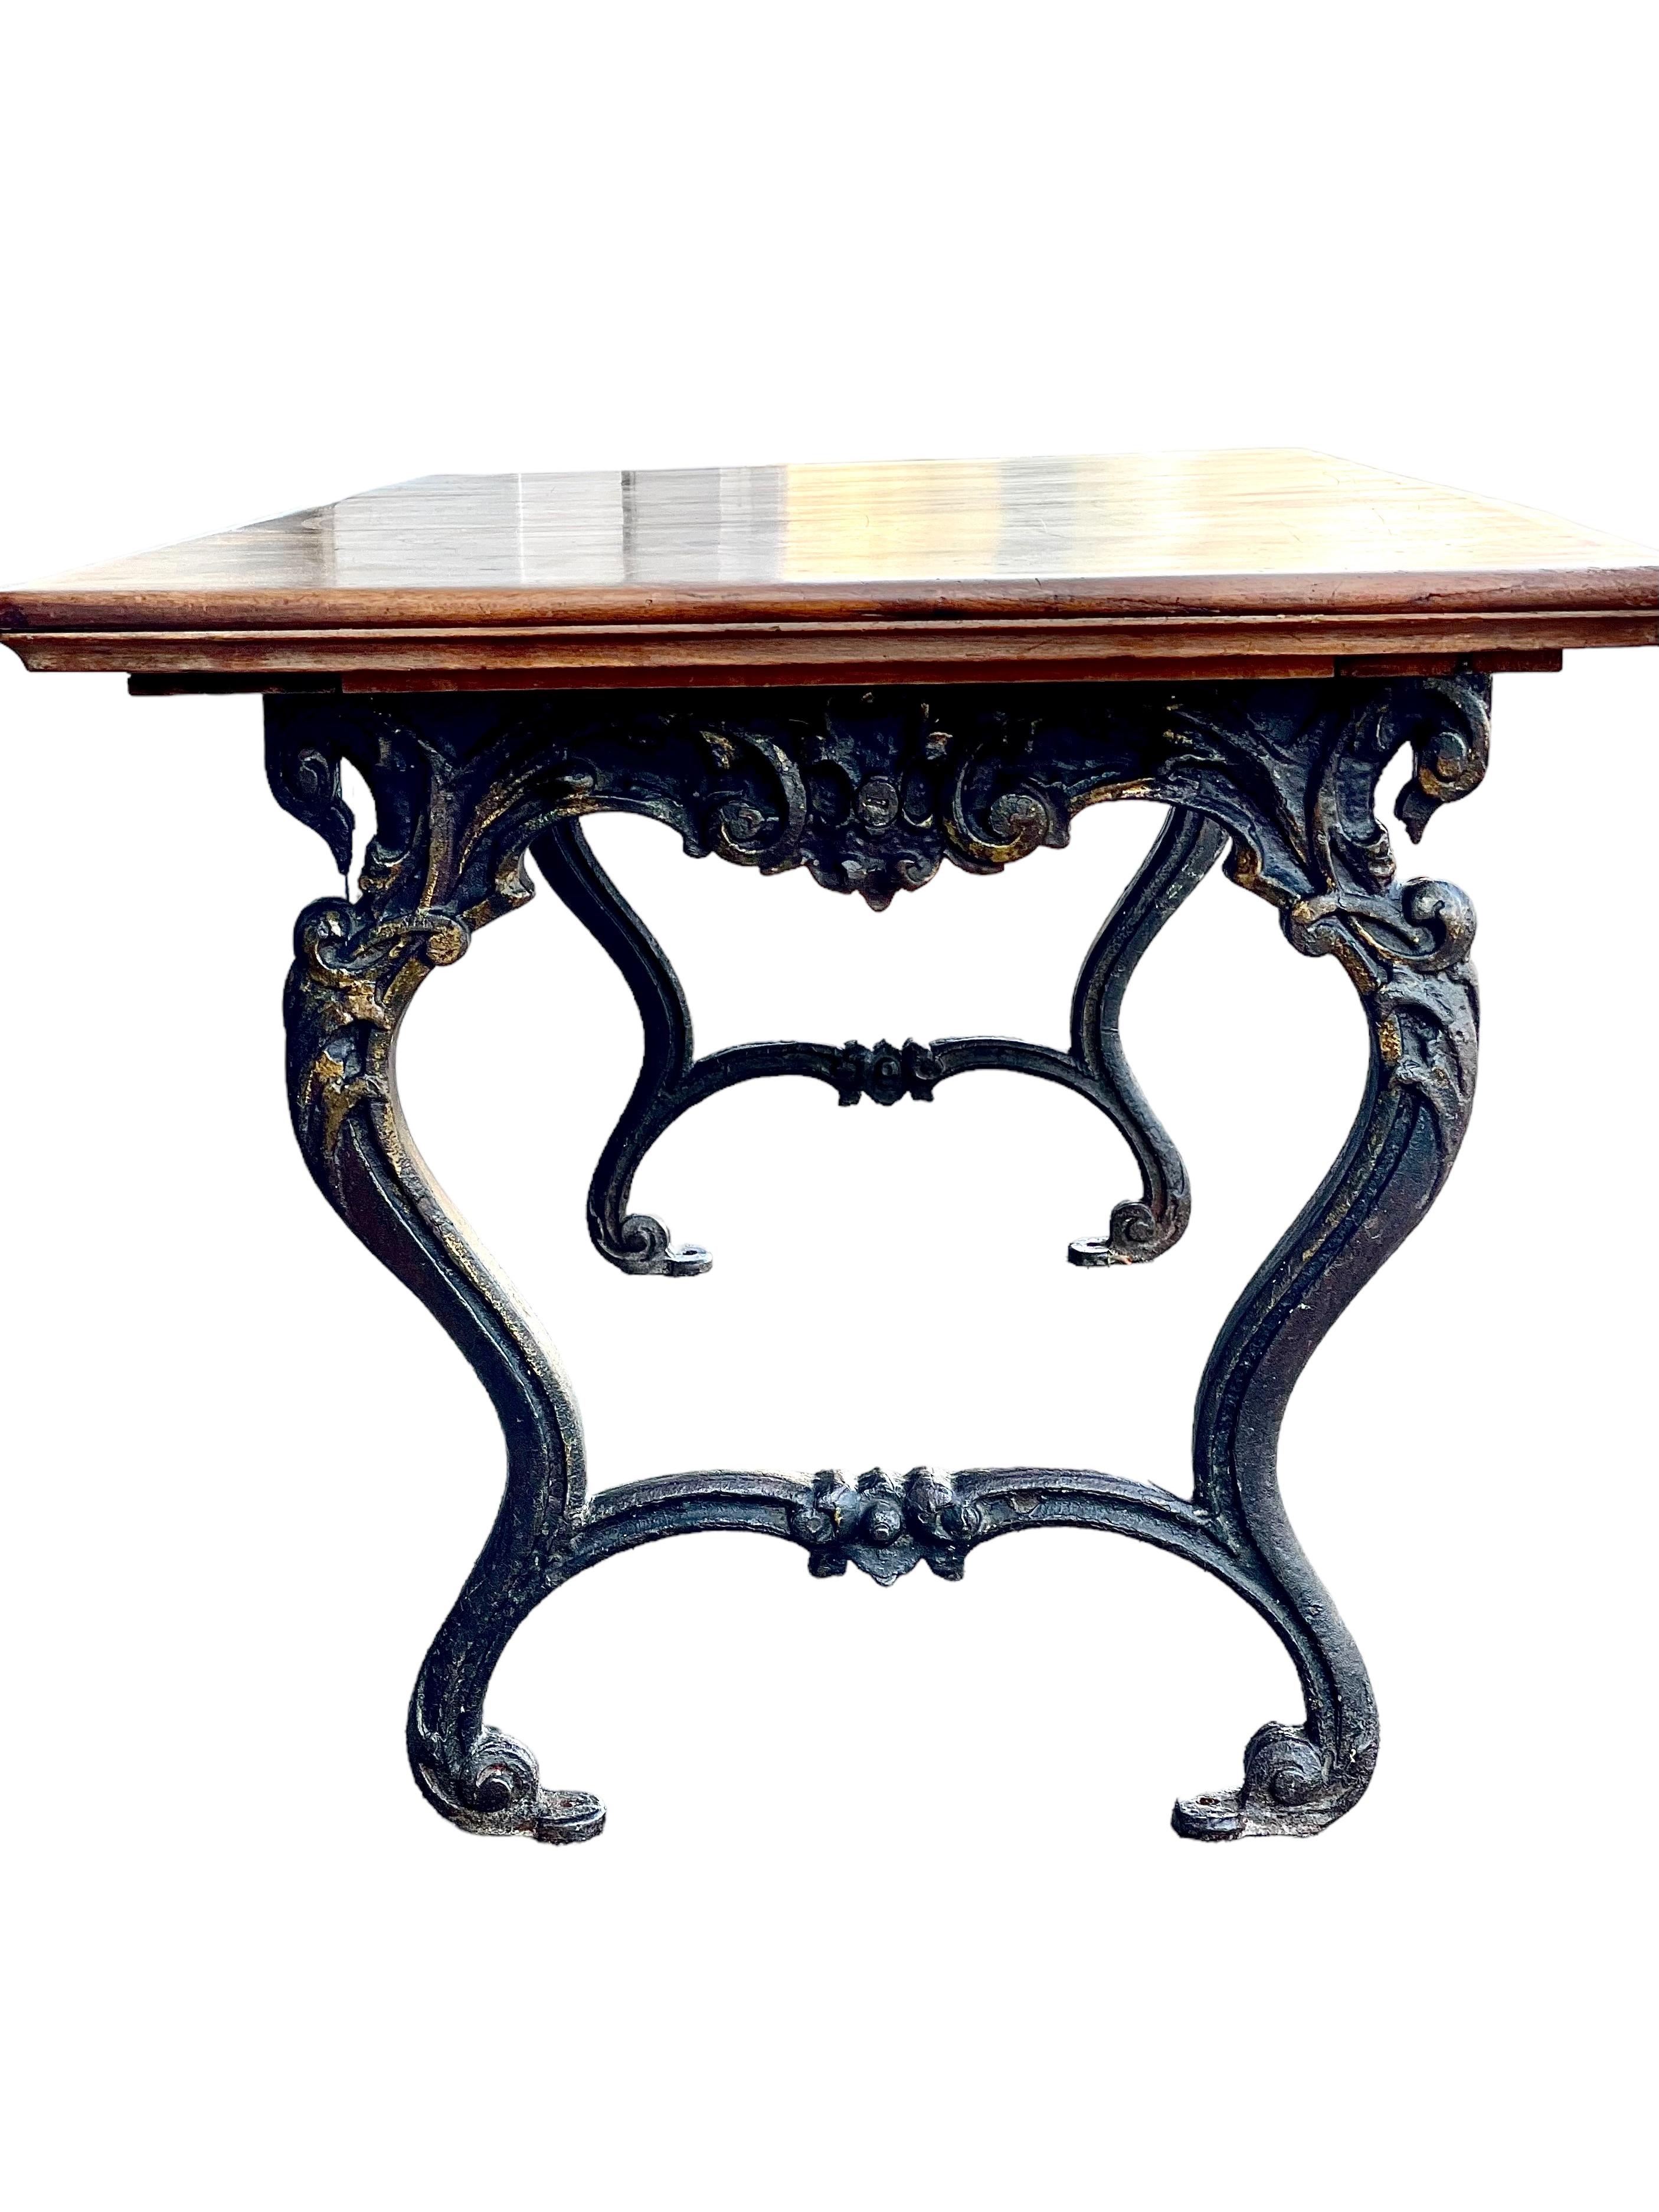 An unusual and fantastically ornate antique table, possibly originating from Spain, complete with beautifully curved and scrolled cast-iron legs. Full of character, its base is wonderfully aged and embellished with swirling and highly decorative